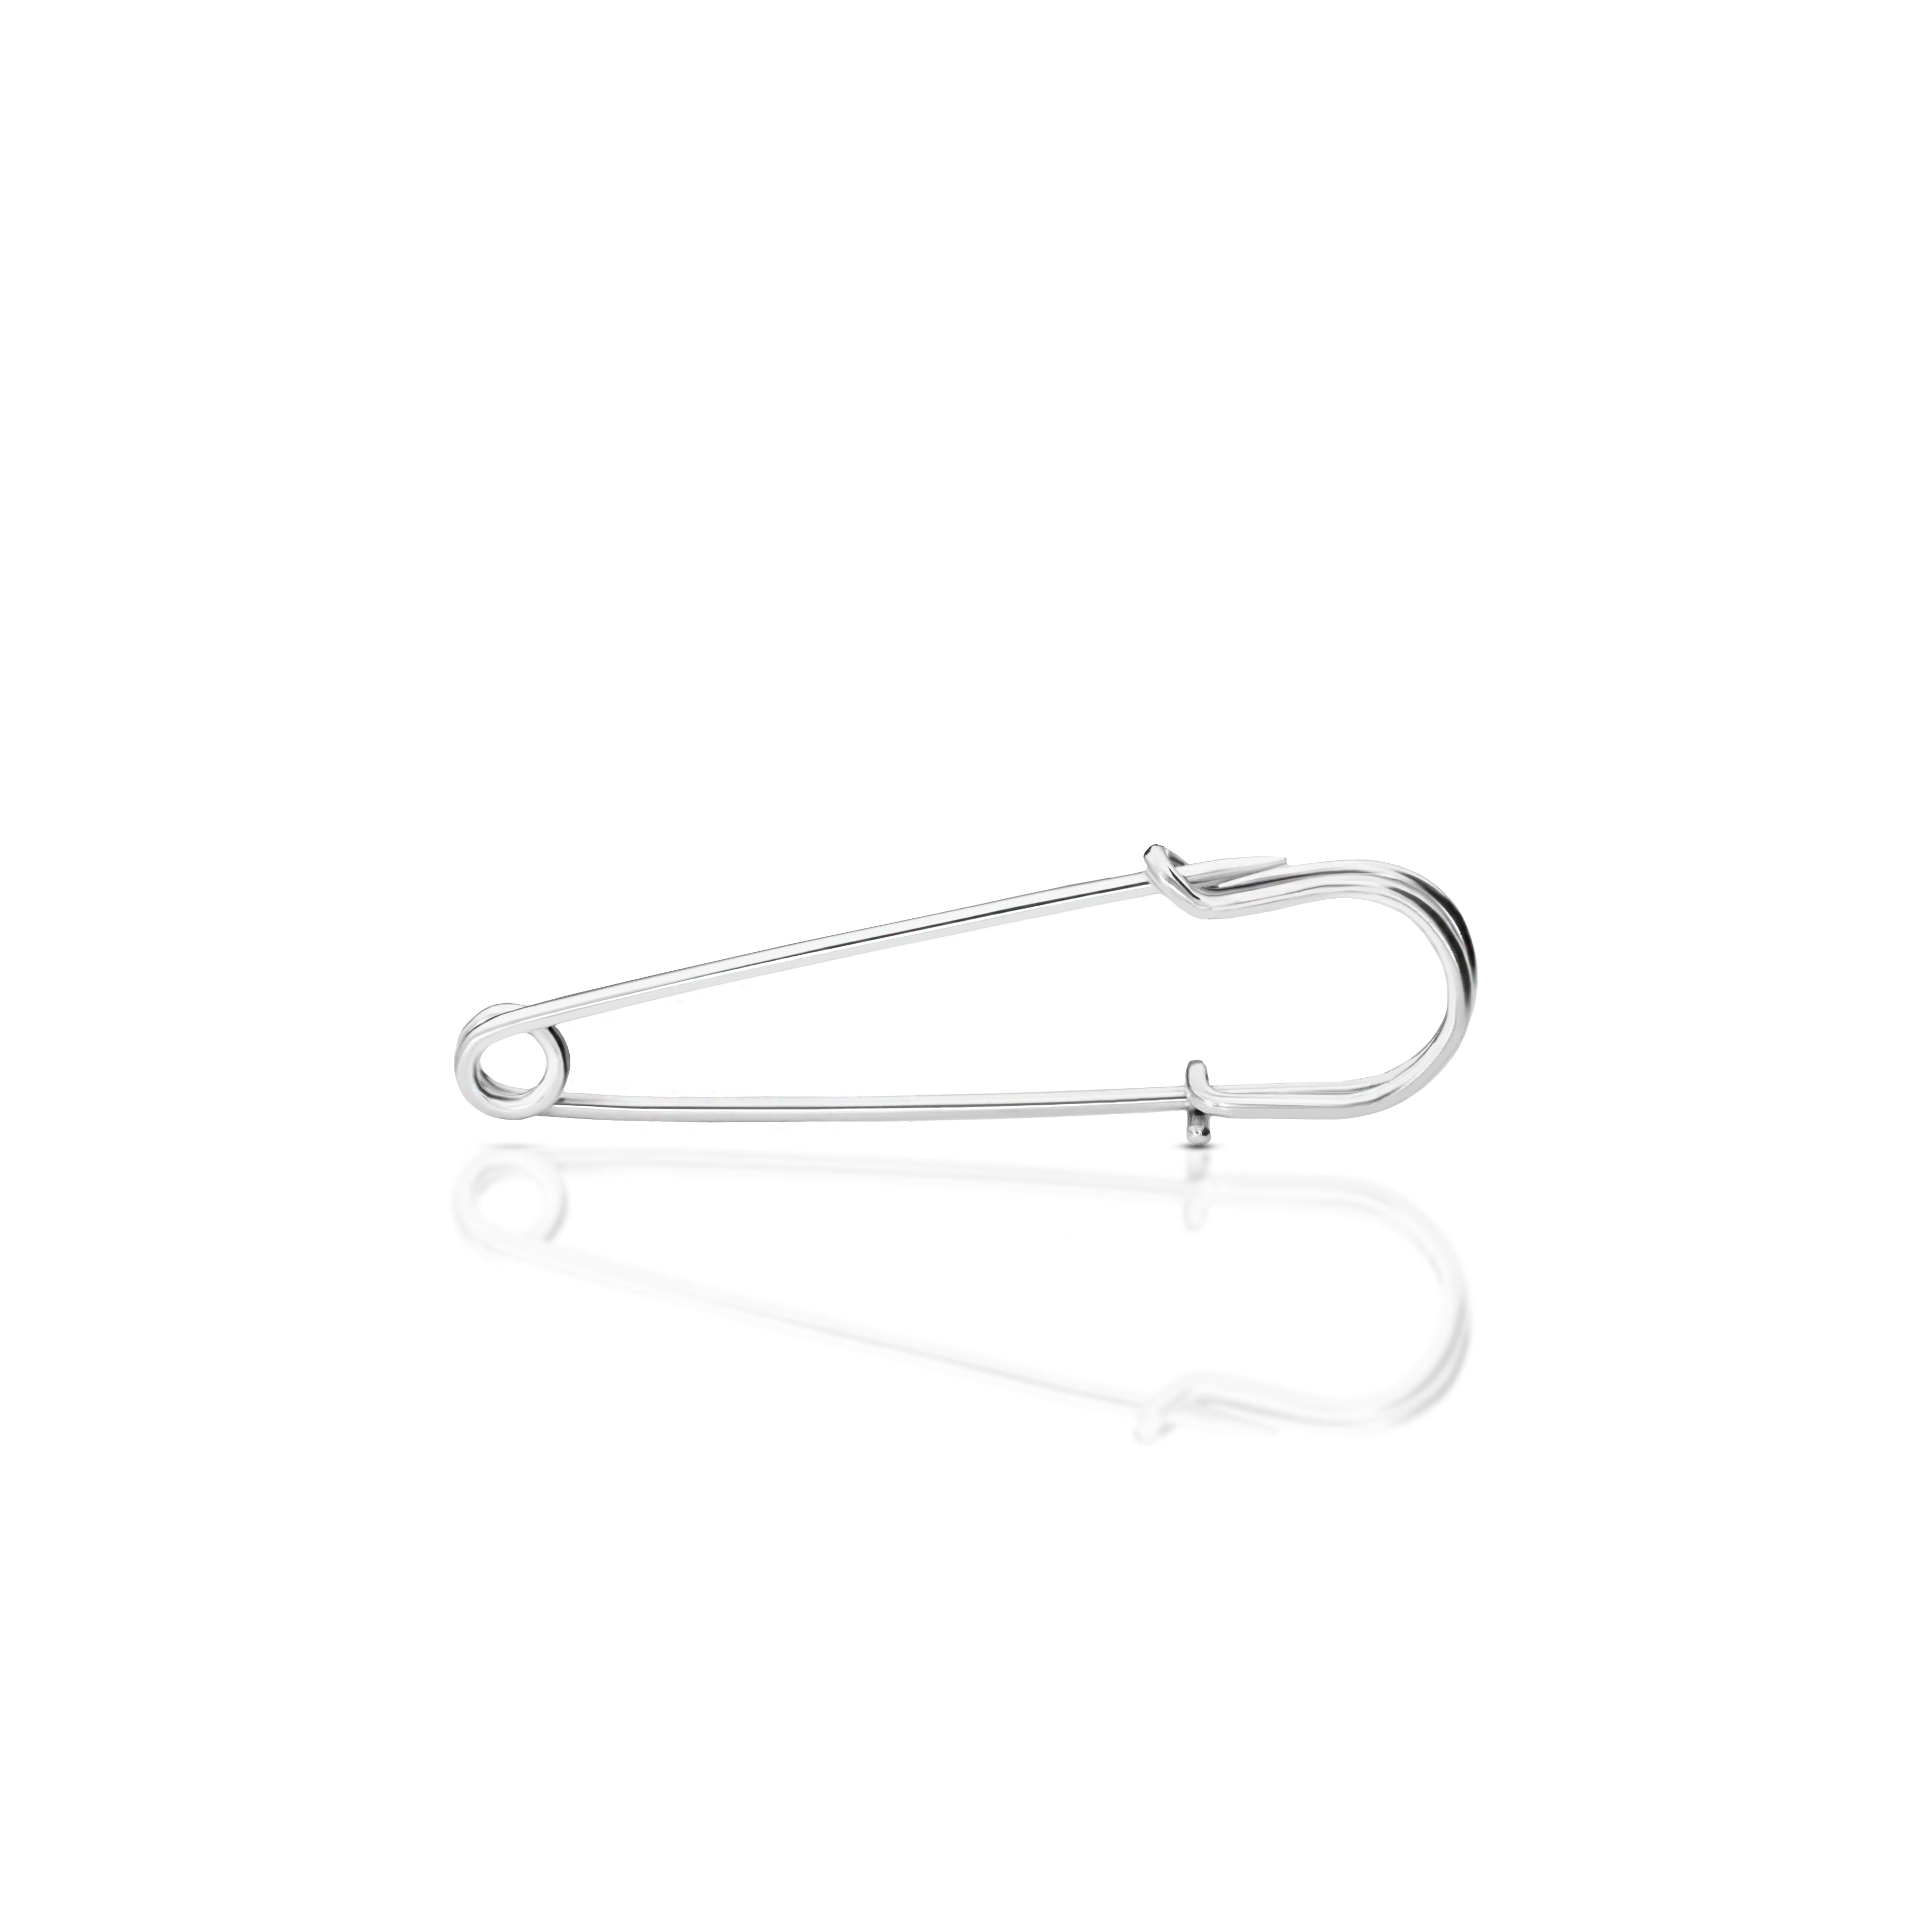 Curved Safety Lapel Pin